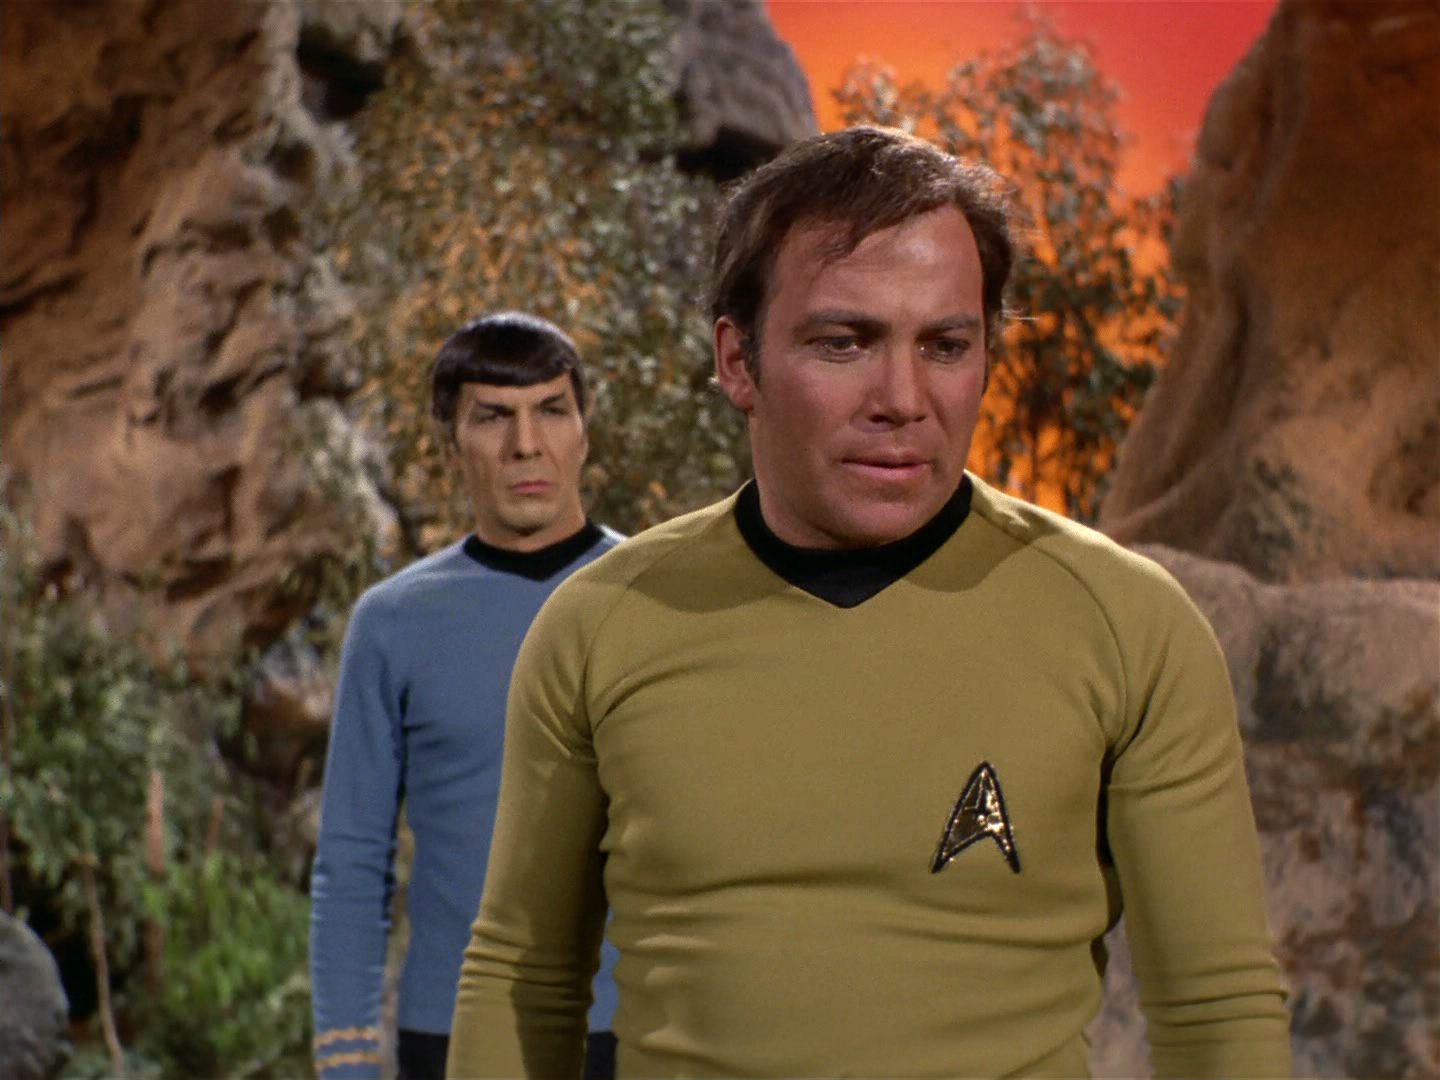 Shatner's Toupee: The toupee and Blu-ray.